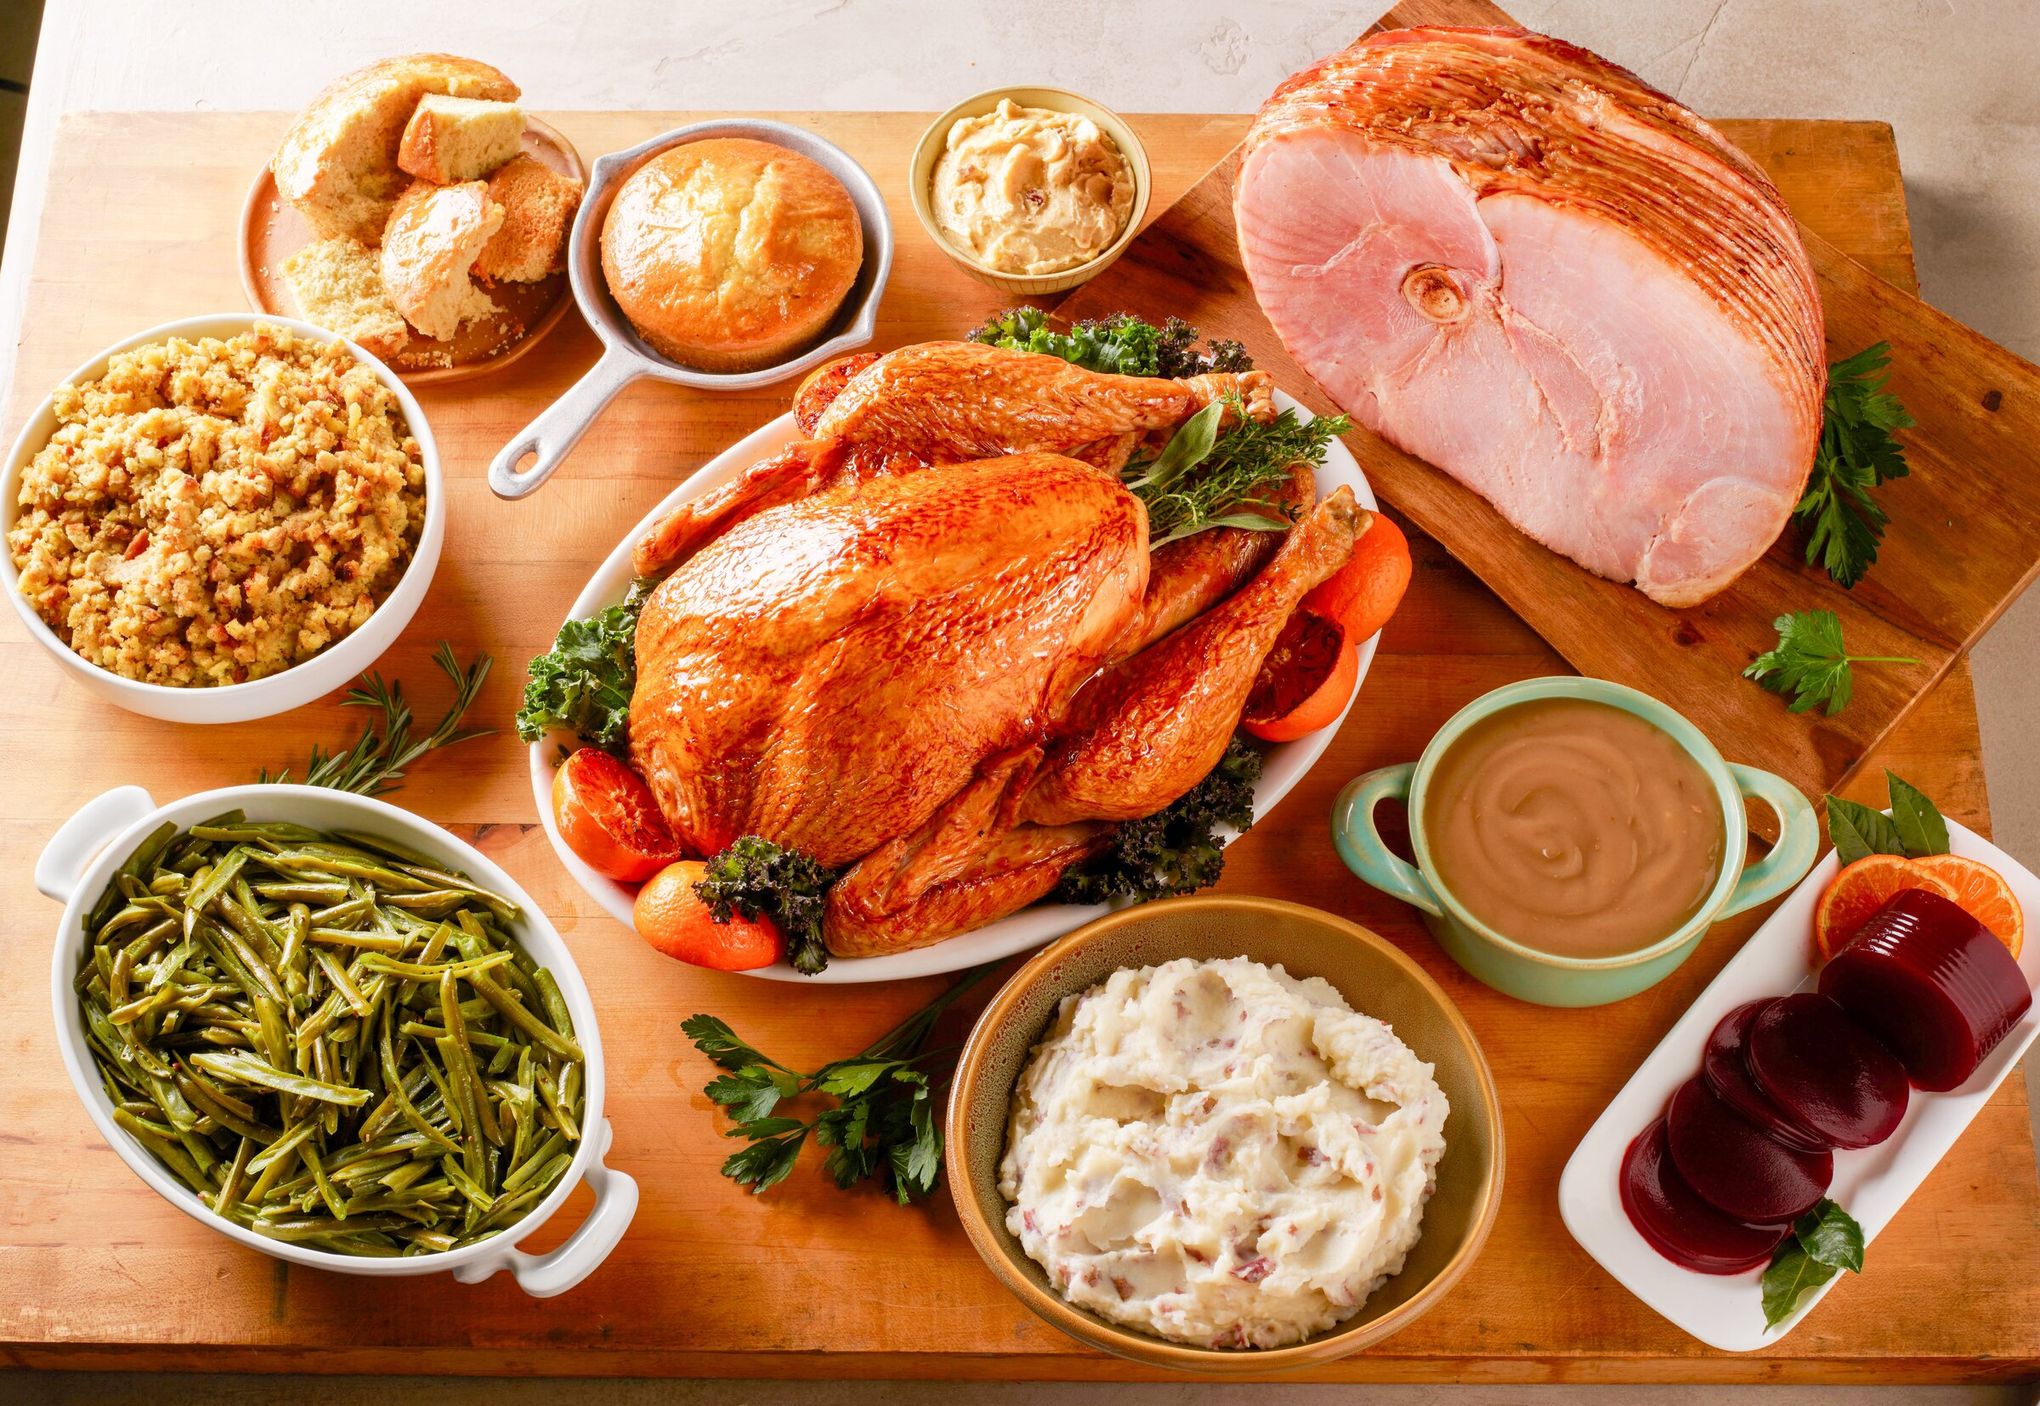 Get All-In on Thanksgiving Turkey With This Amazing Ballotine